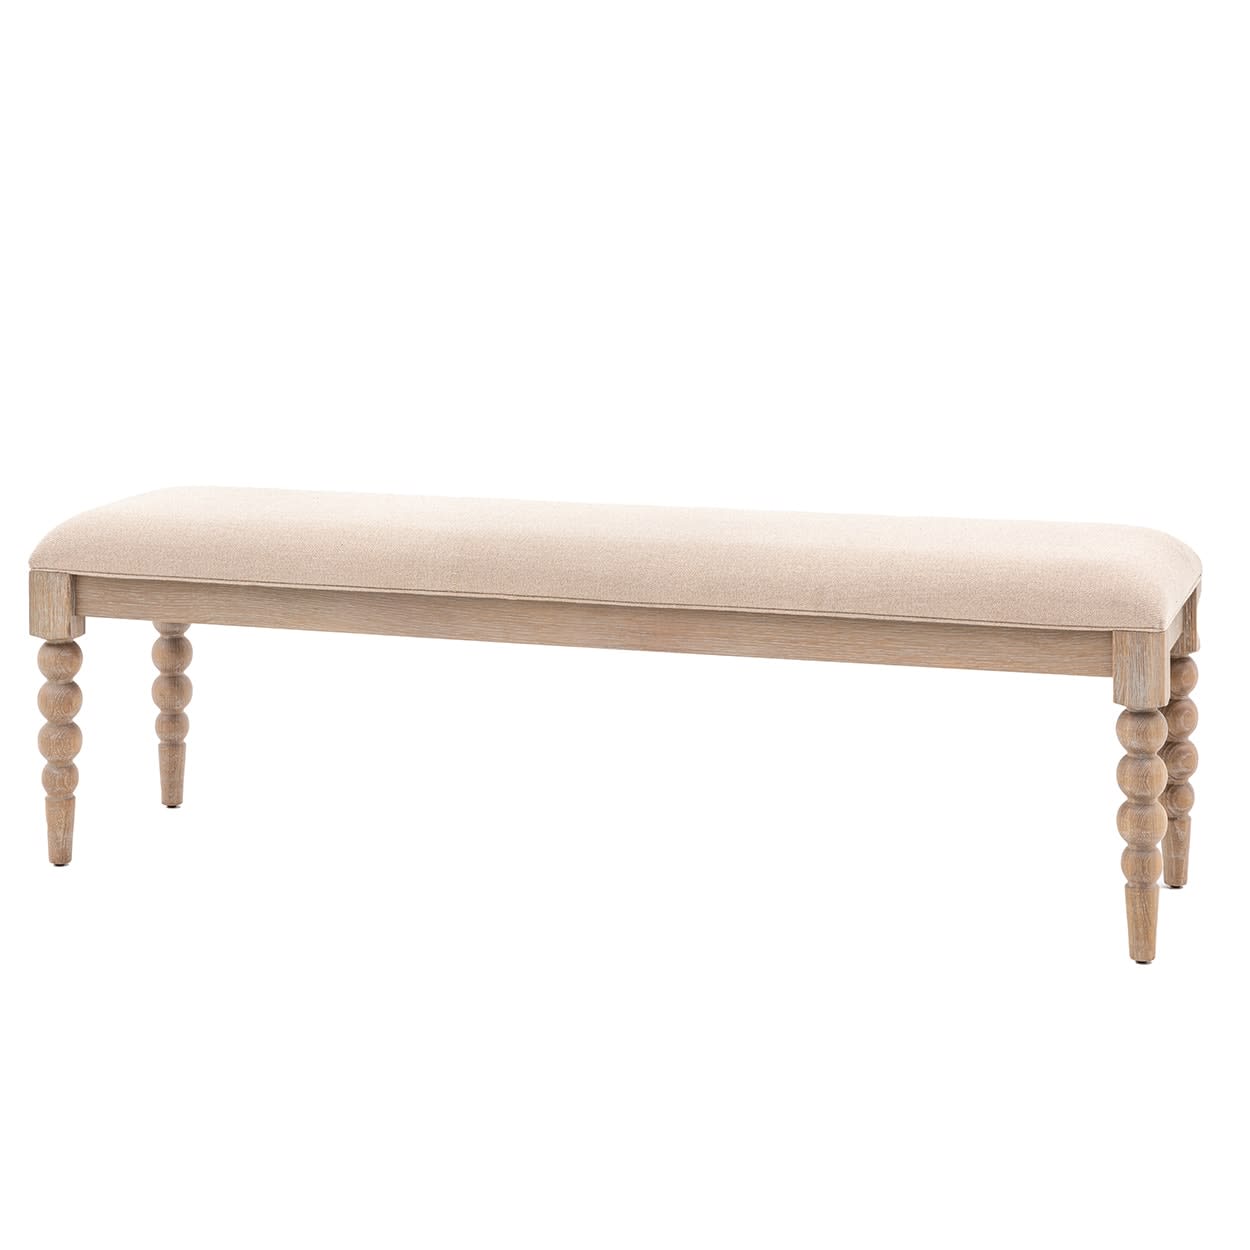 Artisan Wooden and Linen Bench by Gallery Direct